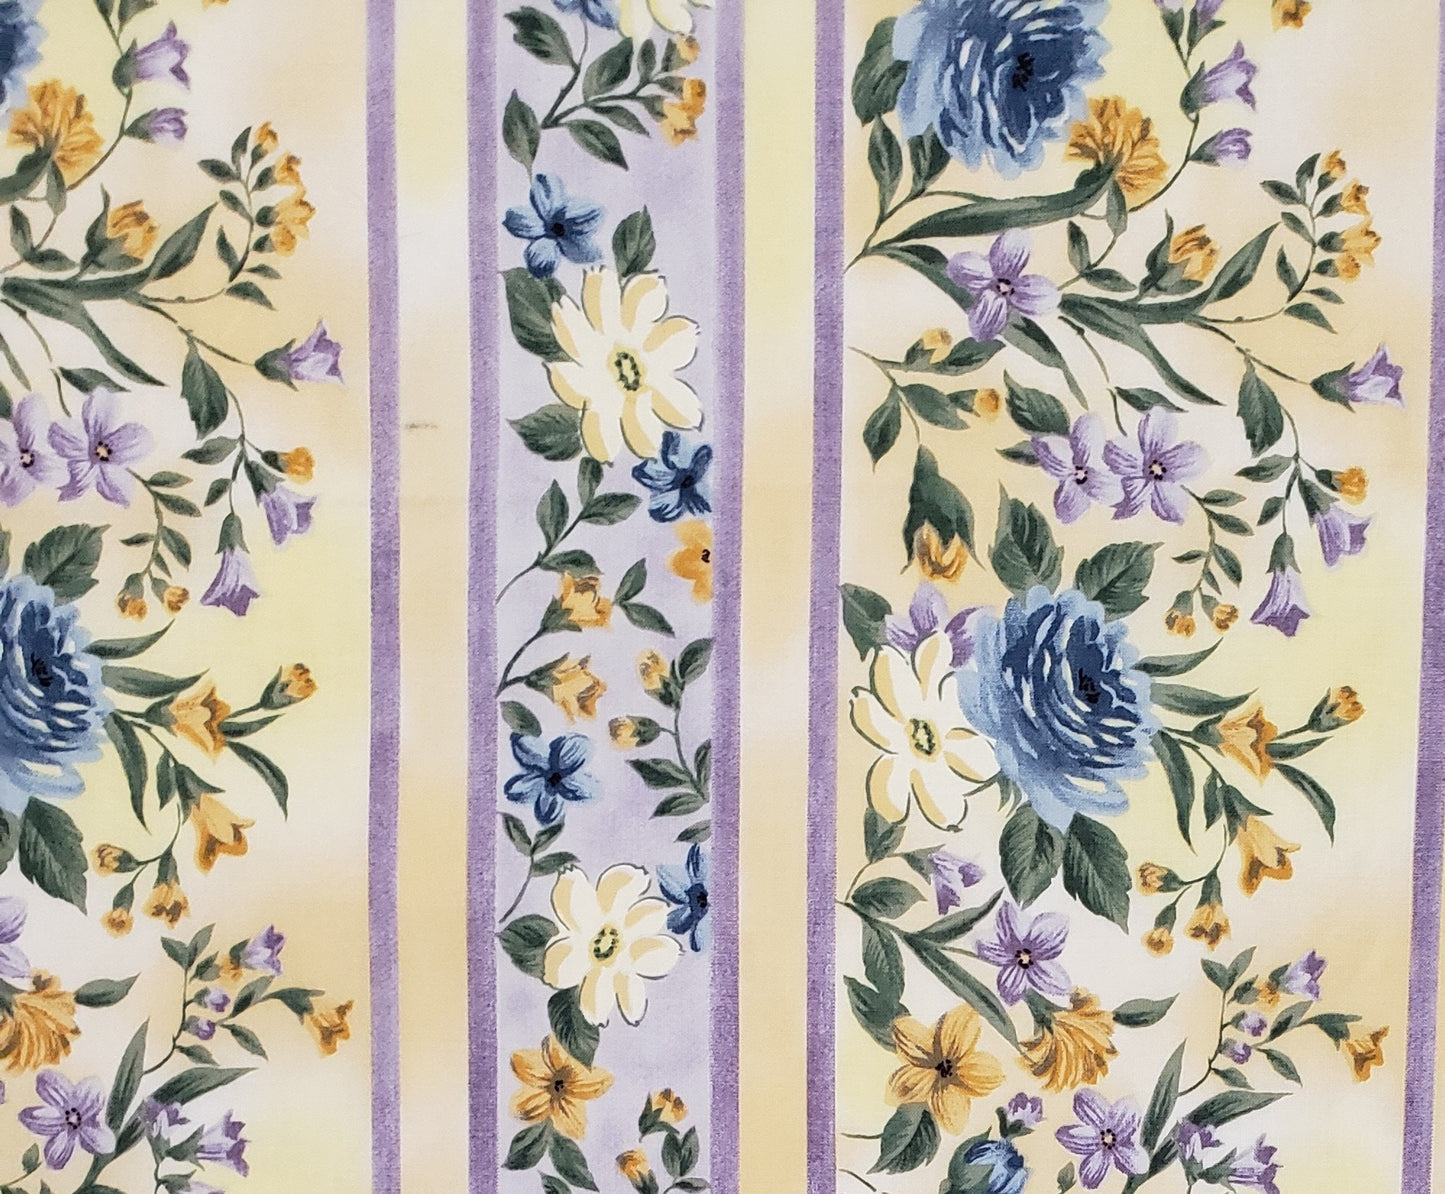 Rainbow Florals by Elenor Burns for Benartex Style 882 - Pale Yellow Stripe Fabric / Purple, Light Purple, Blue, Yellow and White Flowers